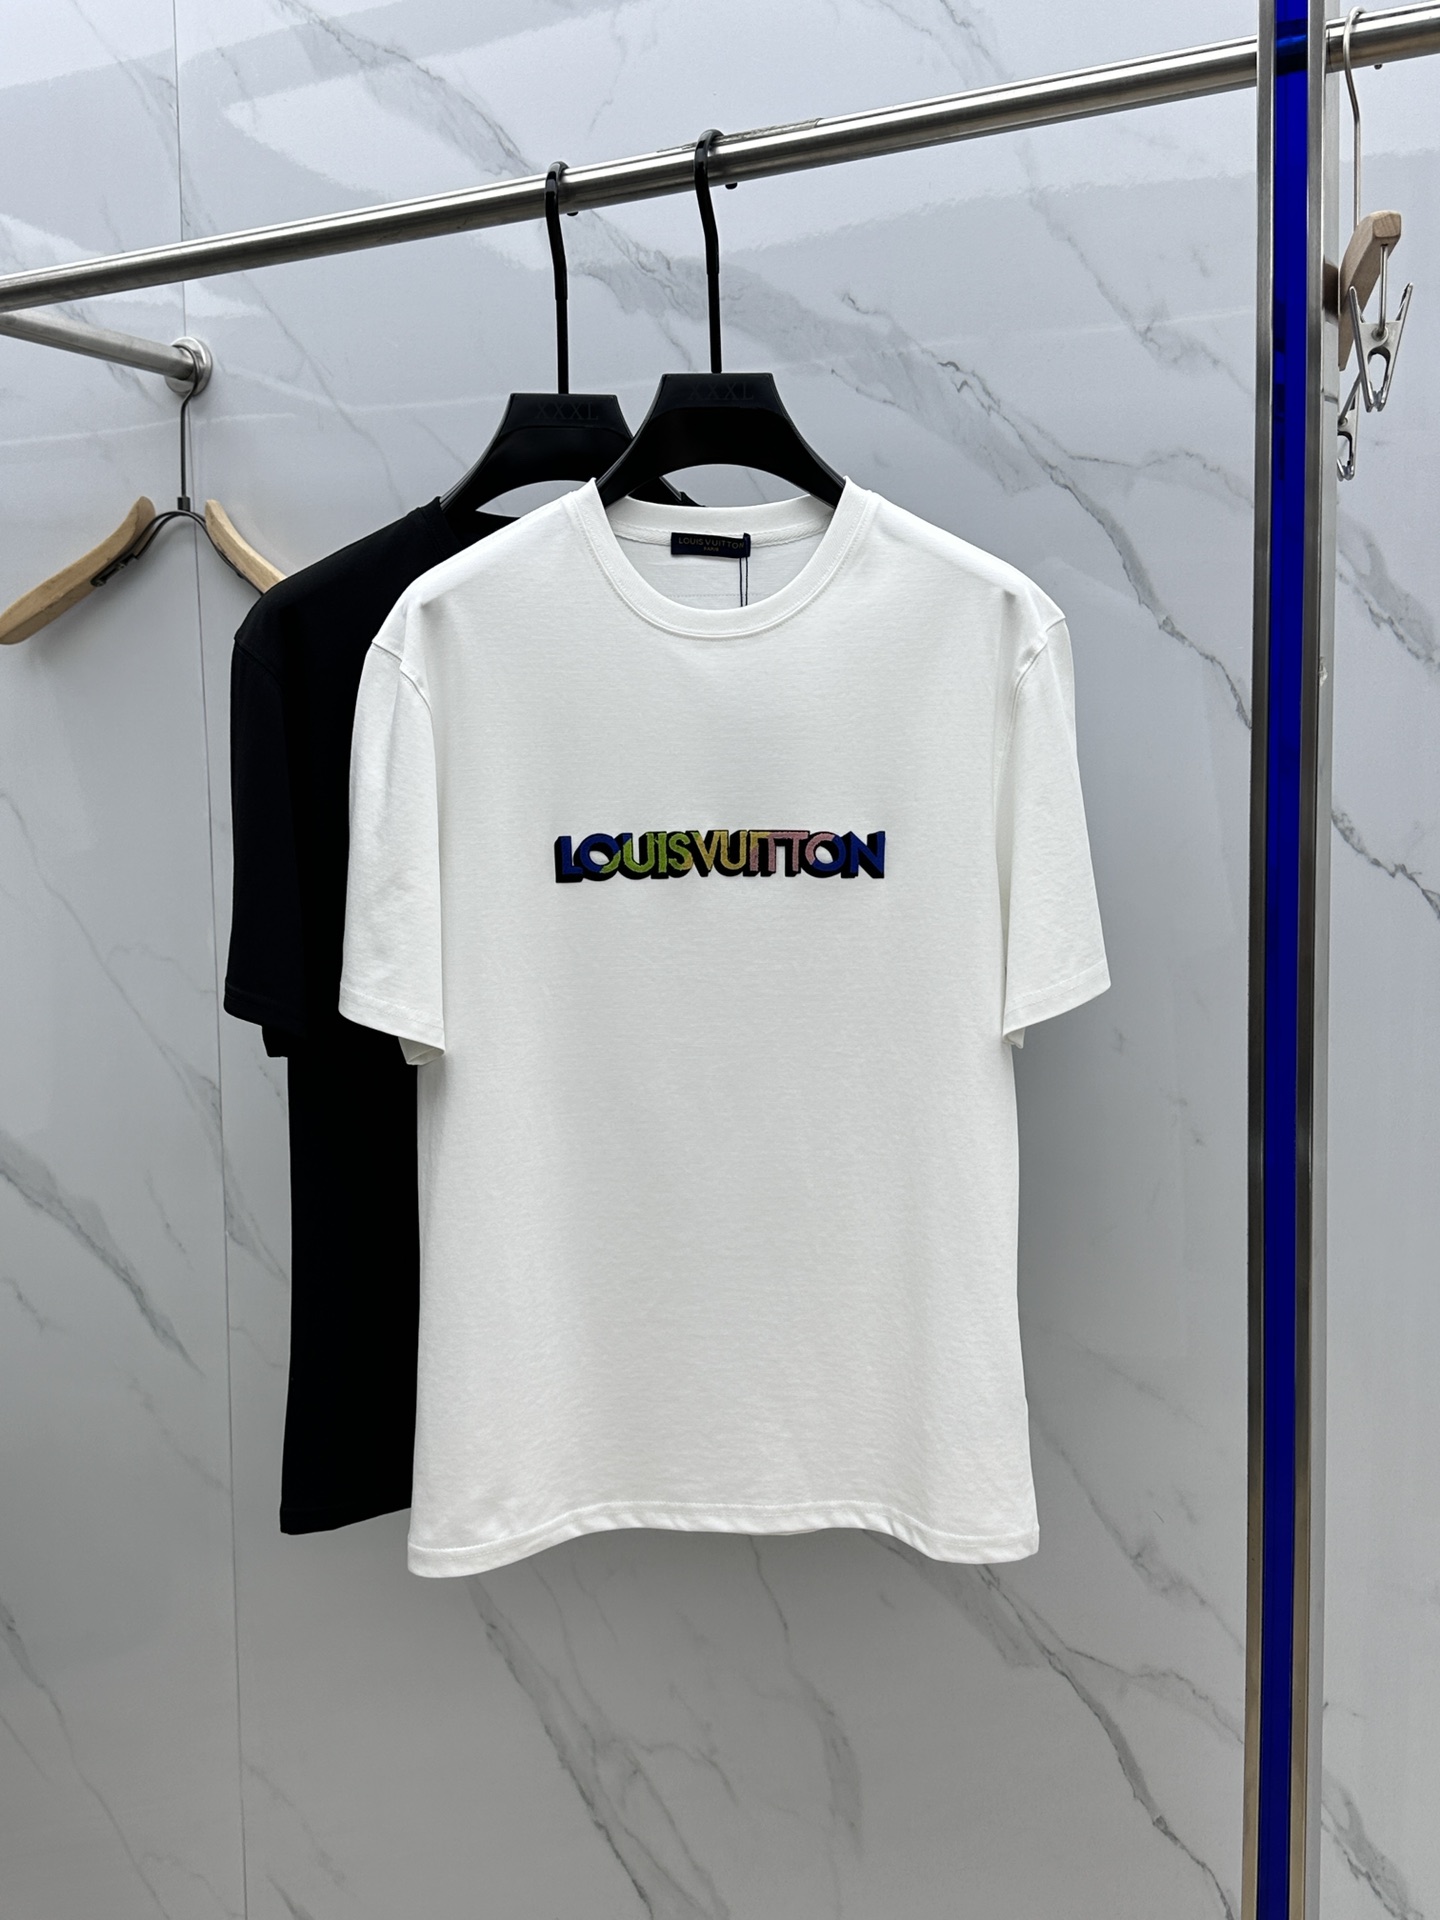 Louis Vuitton New
 Clothing T-Shirt Embroidery Cotton Mercerized Summer Collection